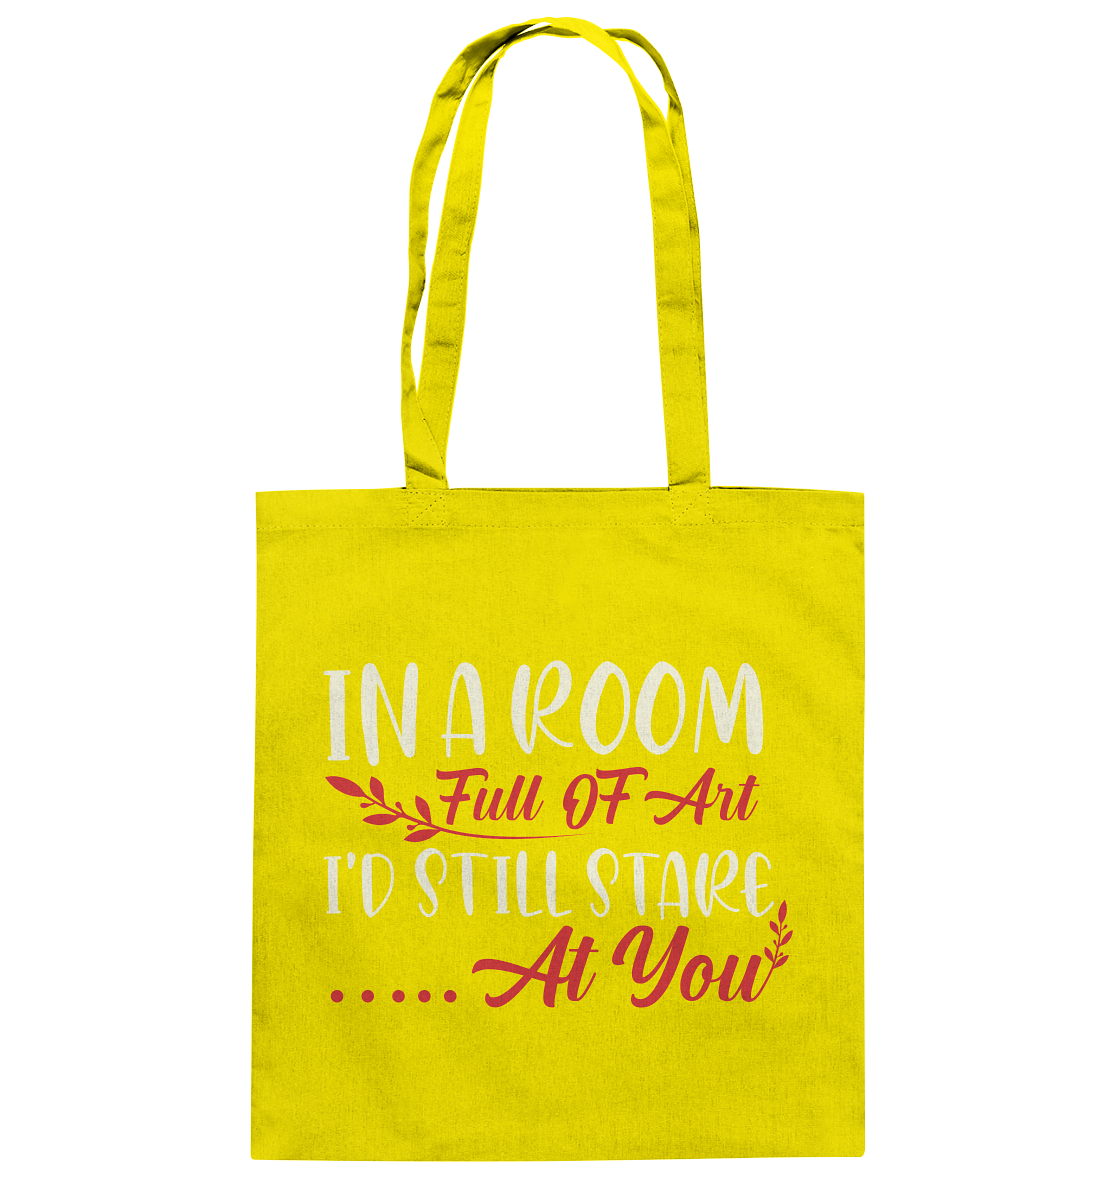 In a room full of art i'd still stare at you - cotton bag